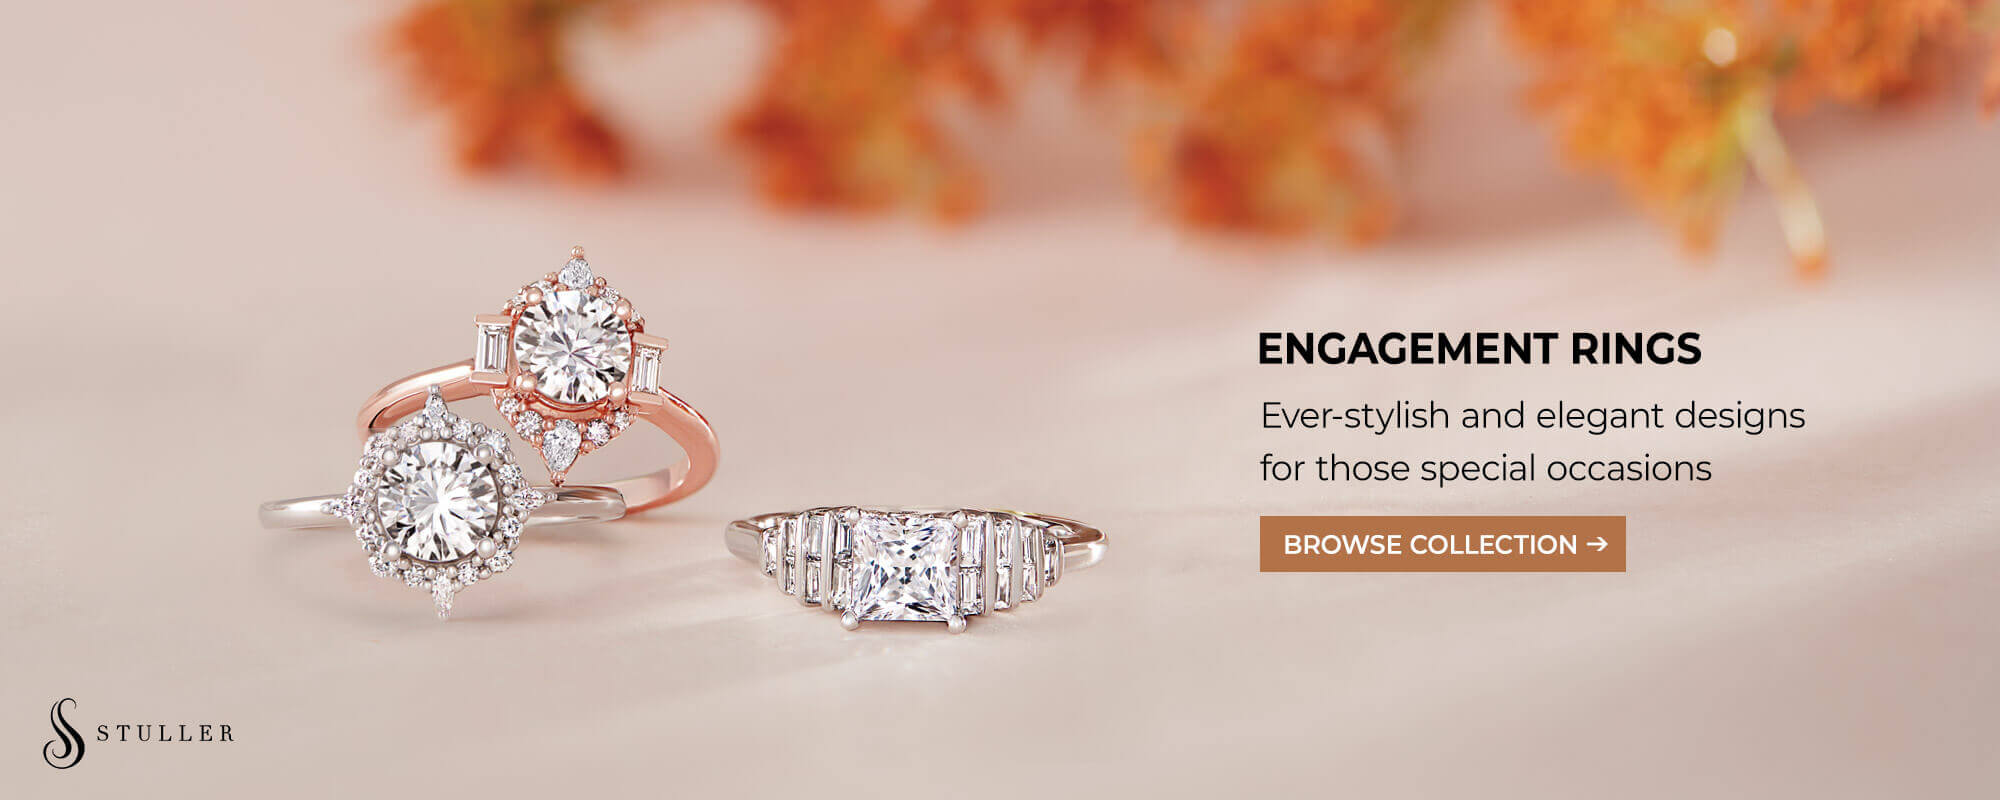 Engagement rings at Marks jewelry co